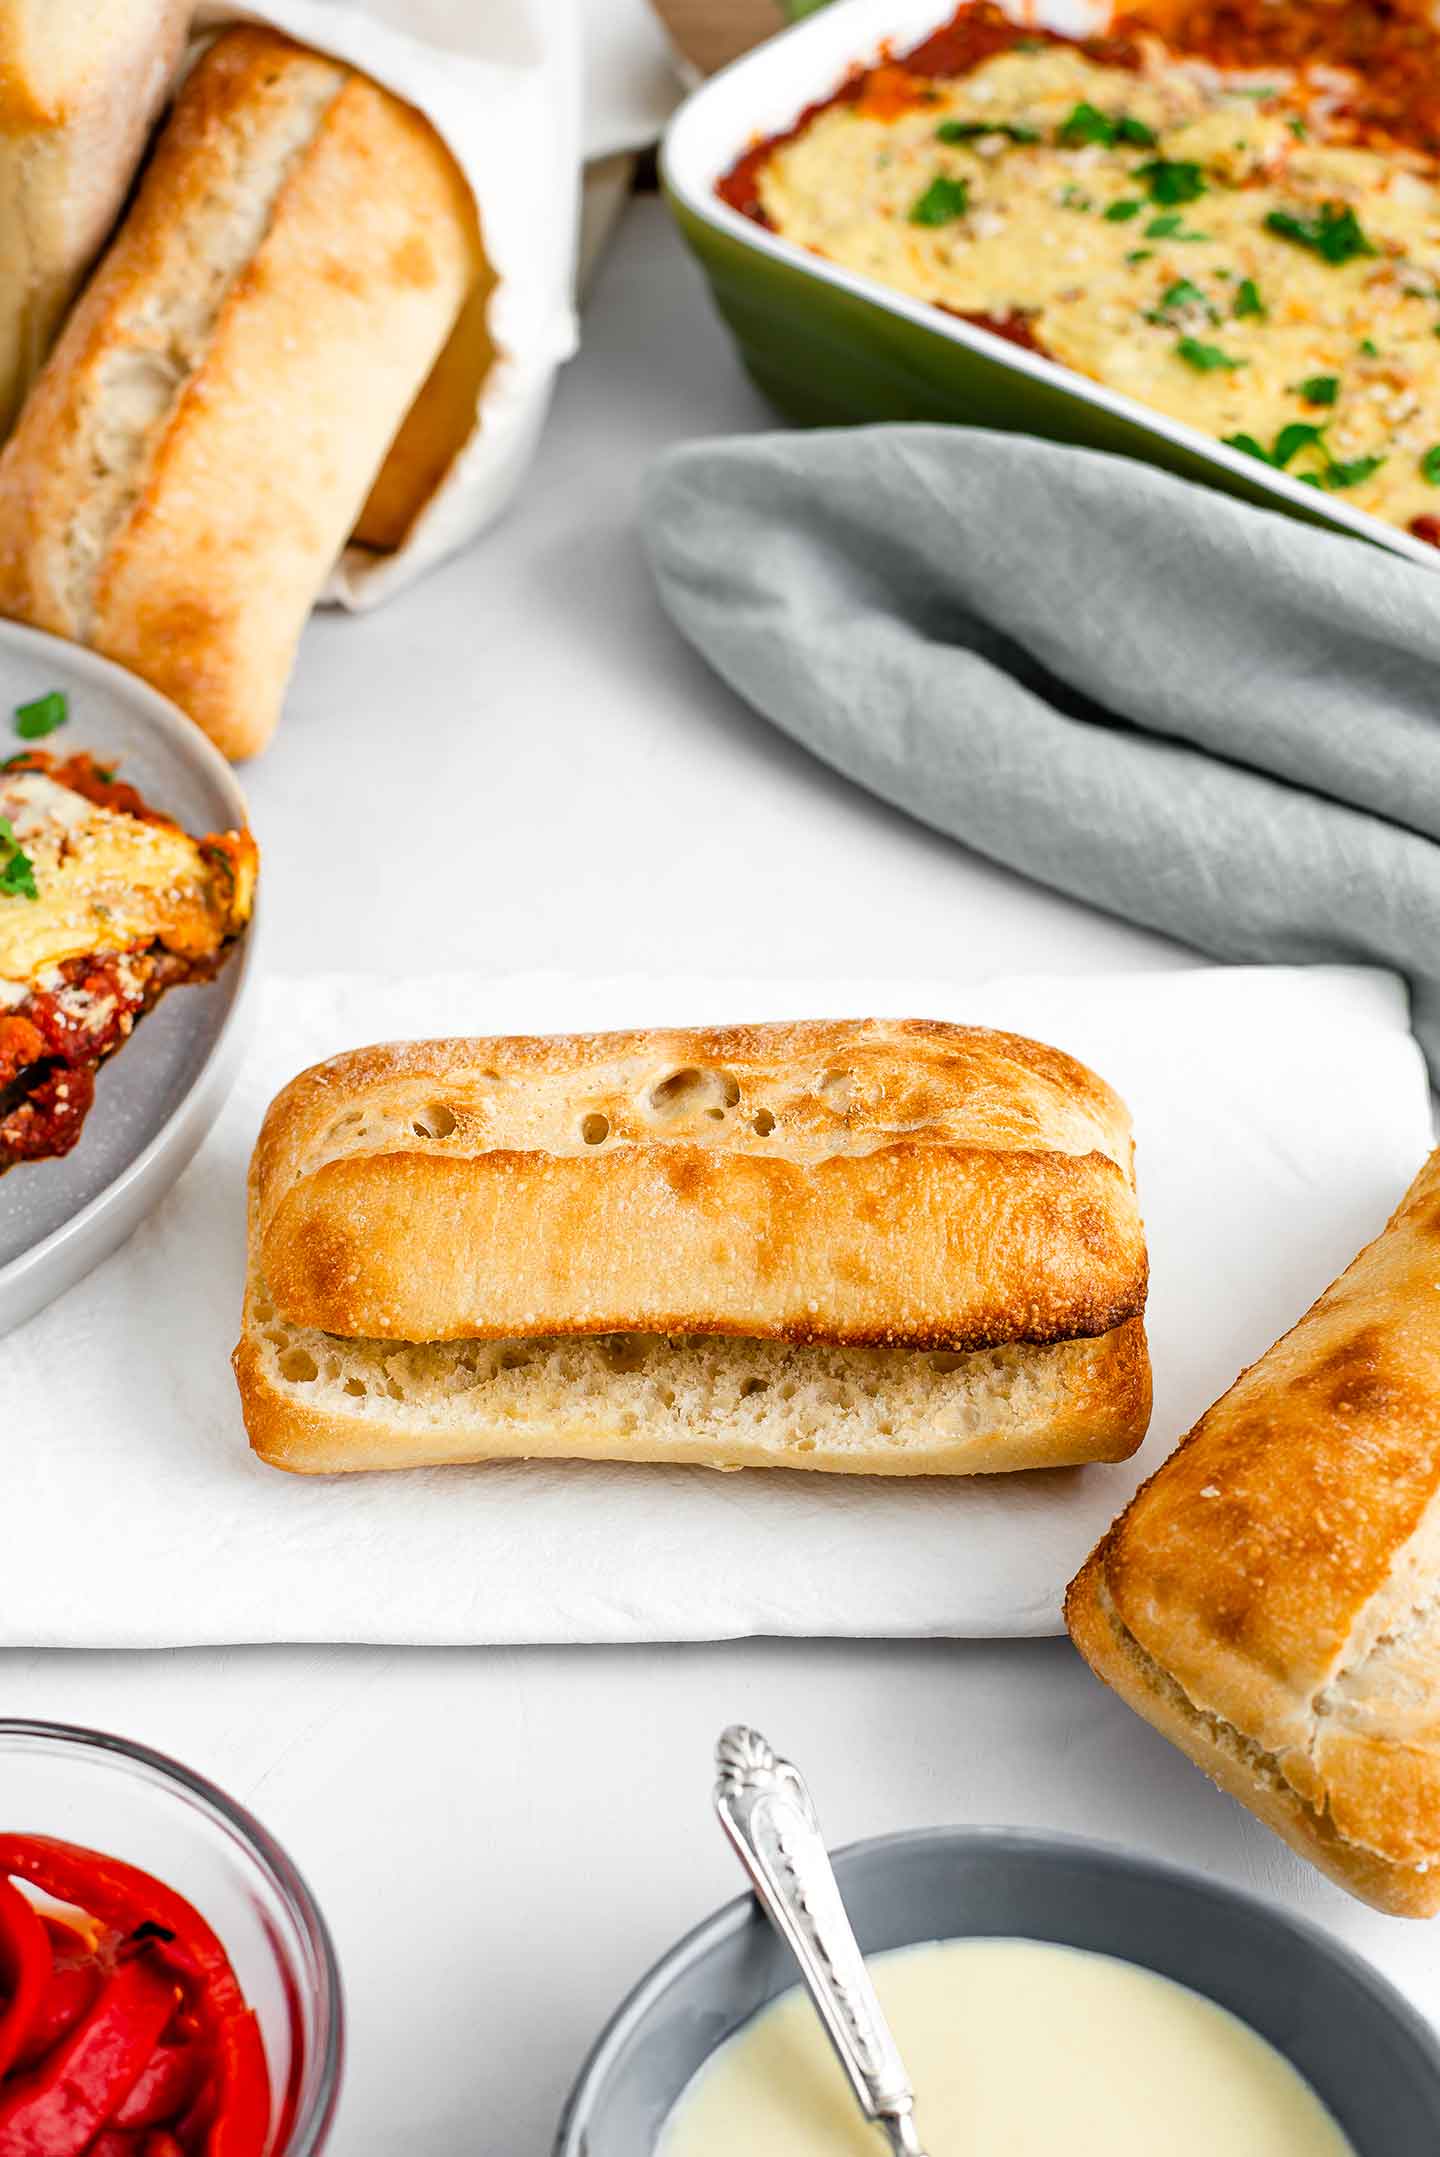 A long ciabatta bun sits on a white tray with eggplant parm in a casserole dish, extra bechamel in a small bowl, and roasted red pepper in another small dish nearby.